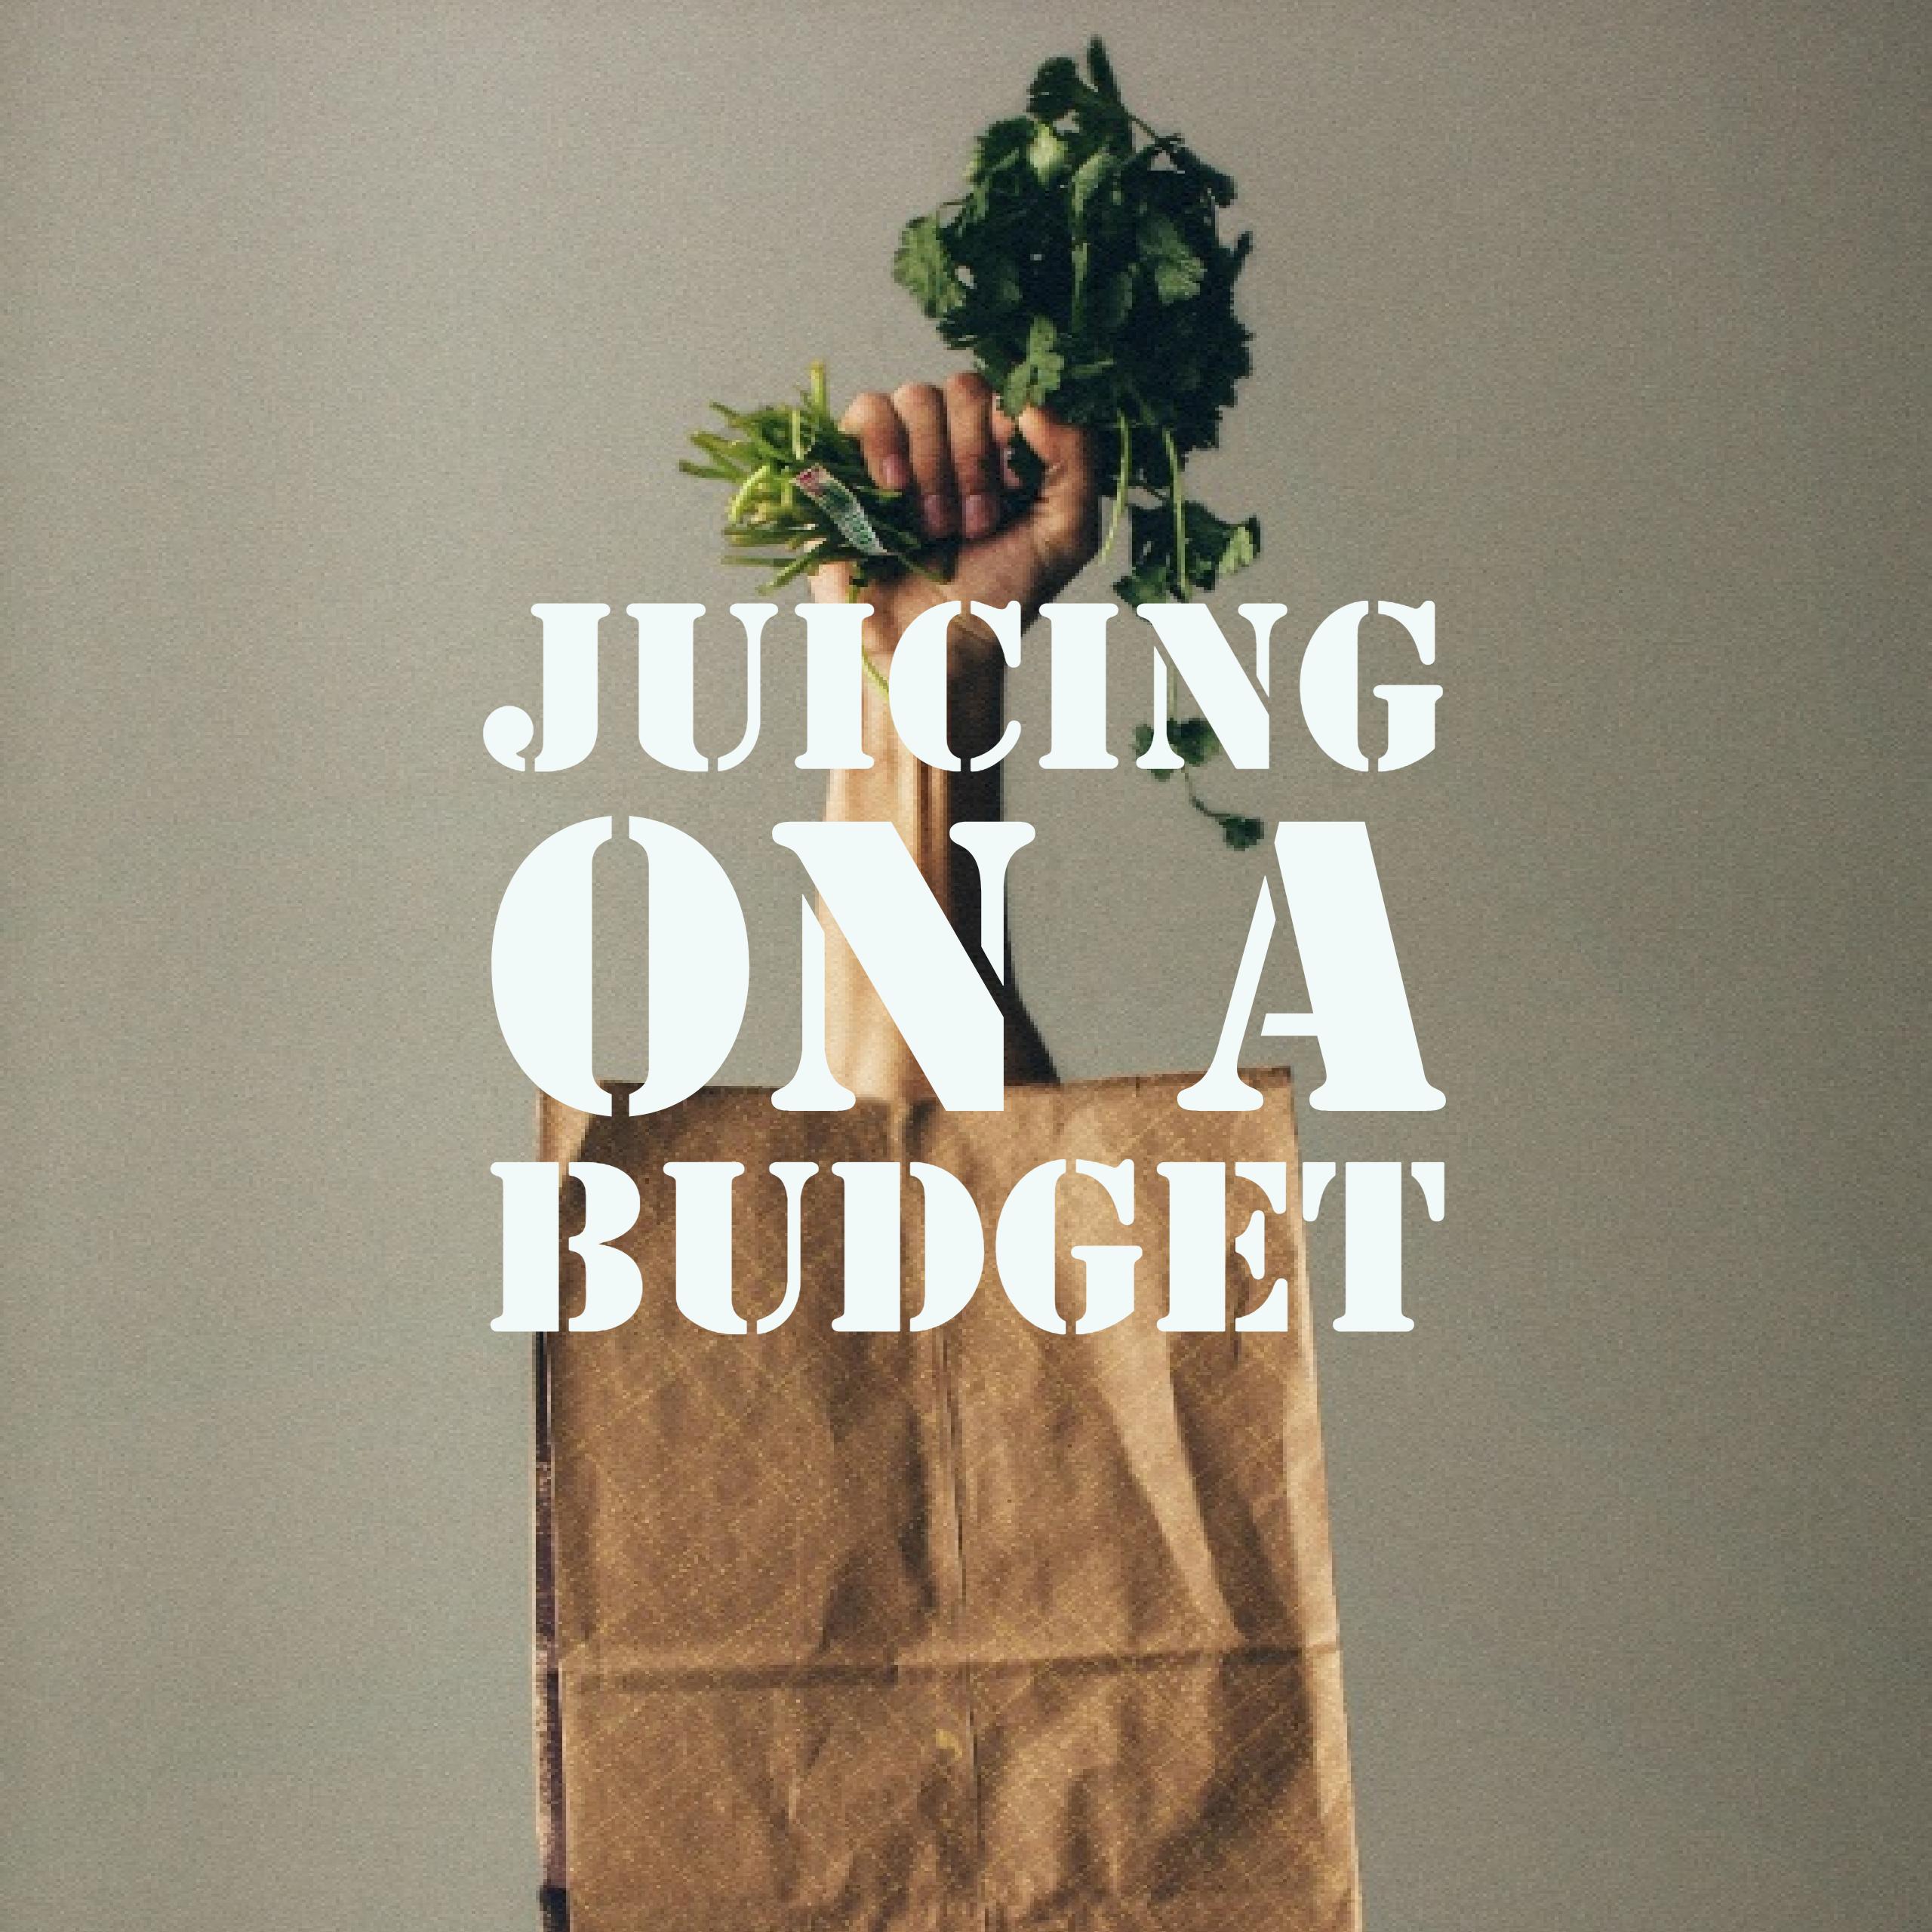 Juicing on a budget